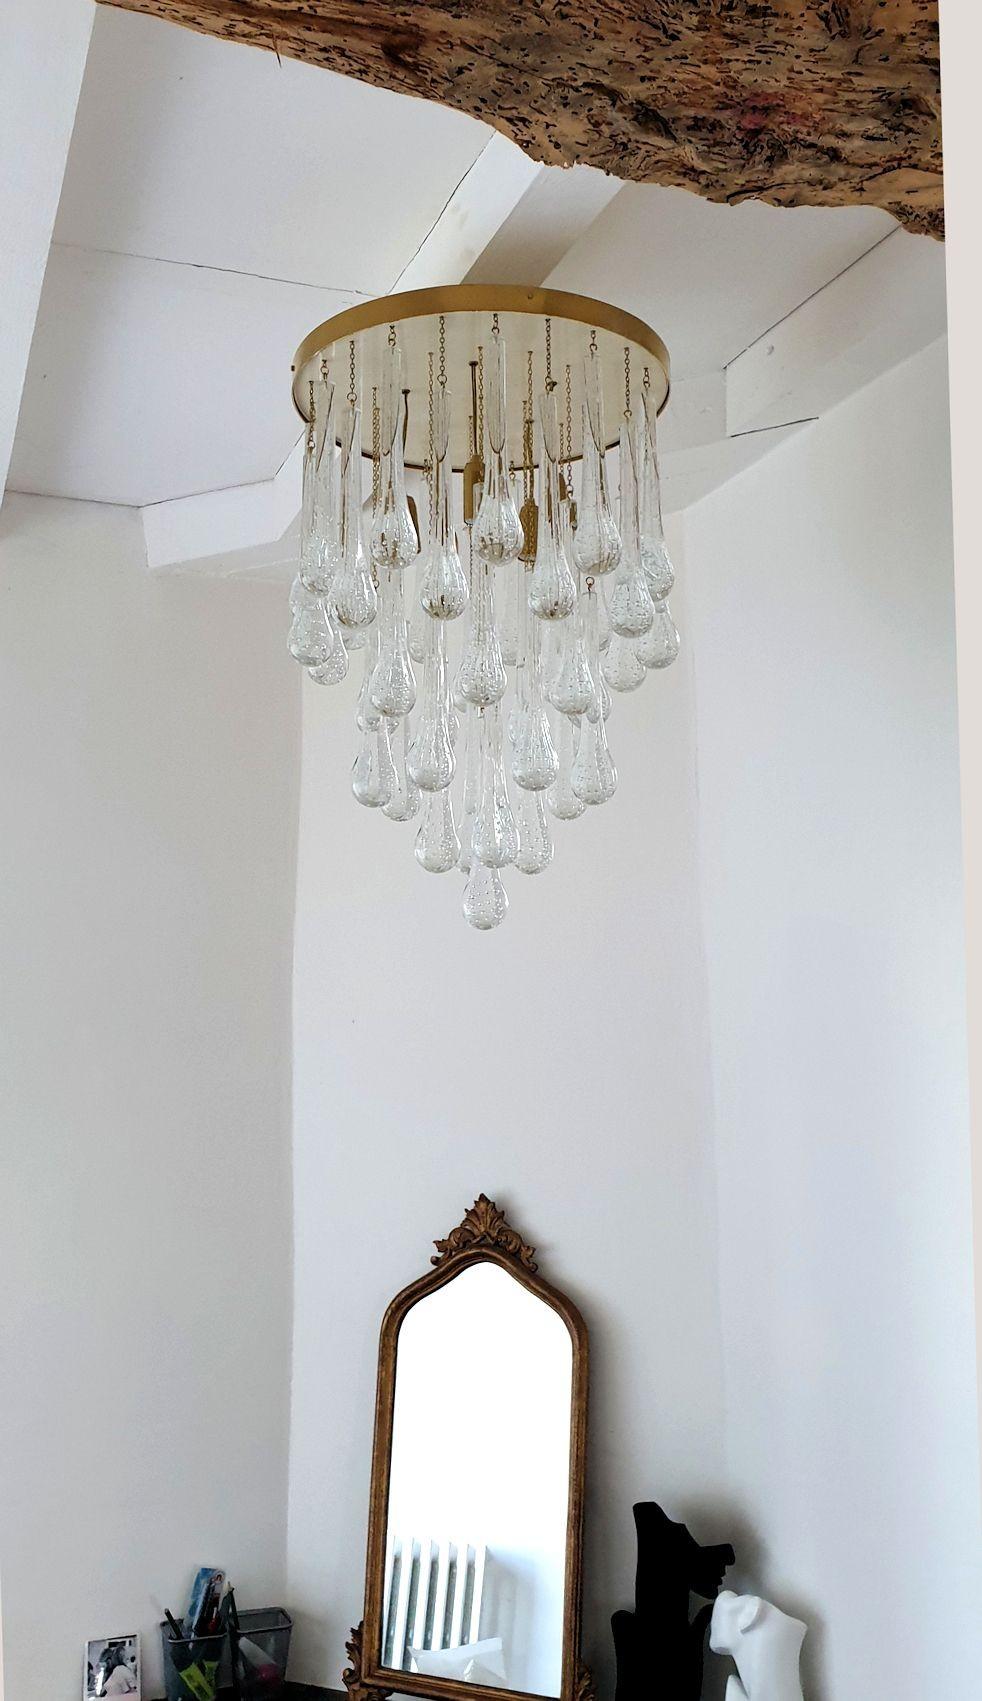 Mid-Century Modern Murano glass tear drop flush mount chandelier, Italy 1980s.
Two Murano chandeliers available: priced and sold individually.
The vintage flush mount is made of a brass & ivory round ceiling plate, and cascading Murano clear glass